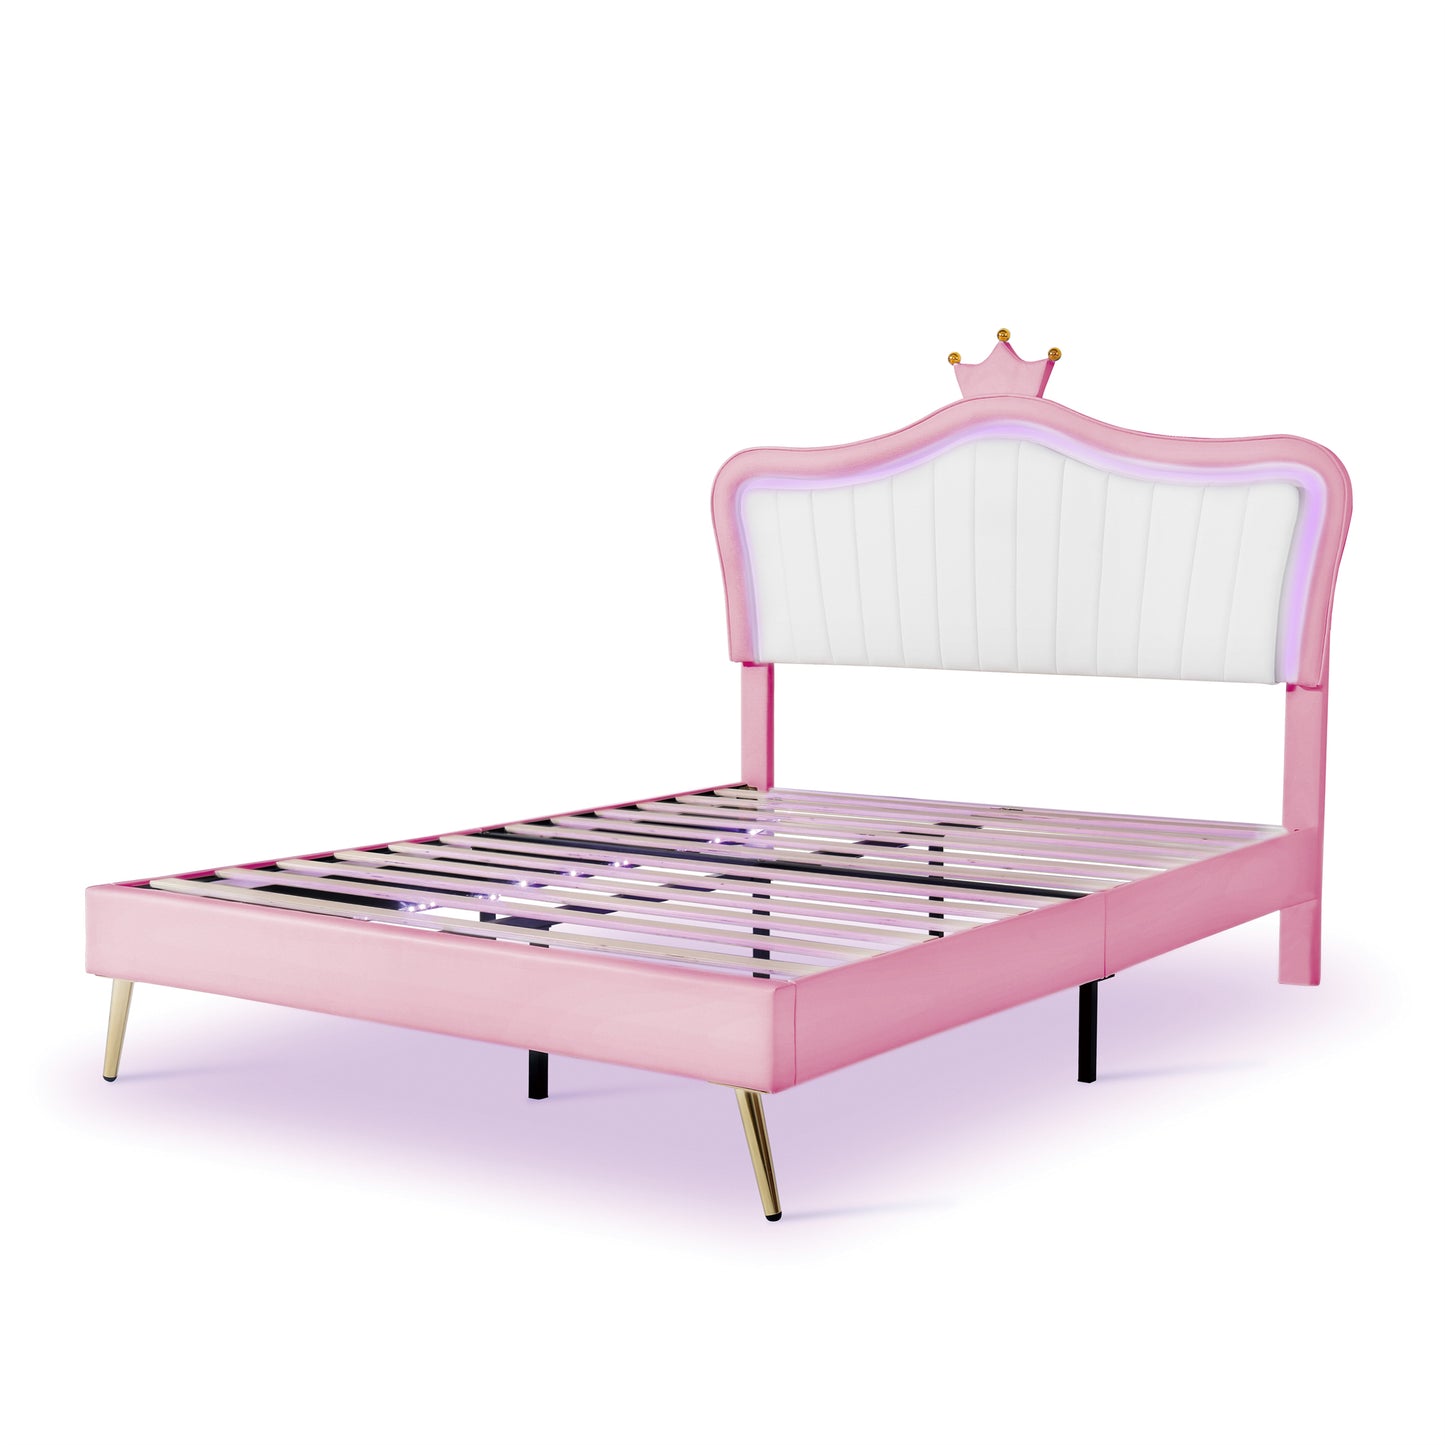 Queen Size Upholstered Platform Bed Frame with LED Lights, Princess Bed With Crown Headboard, White+Pink